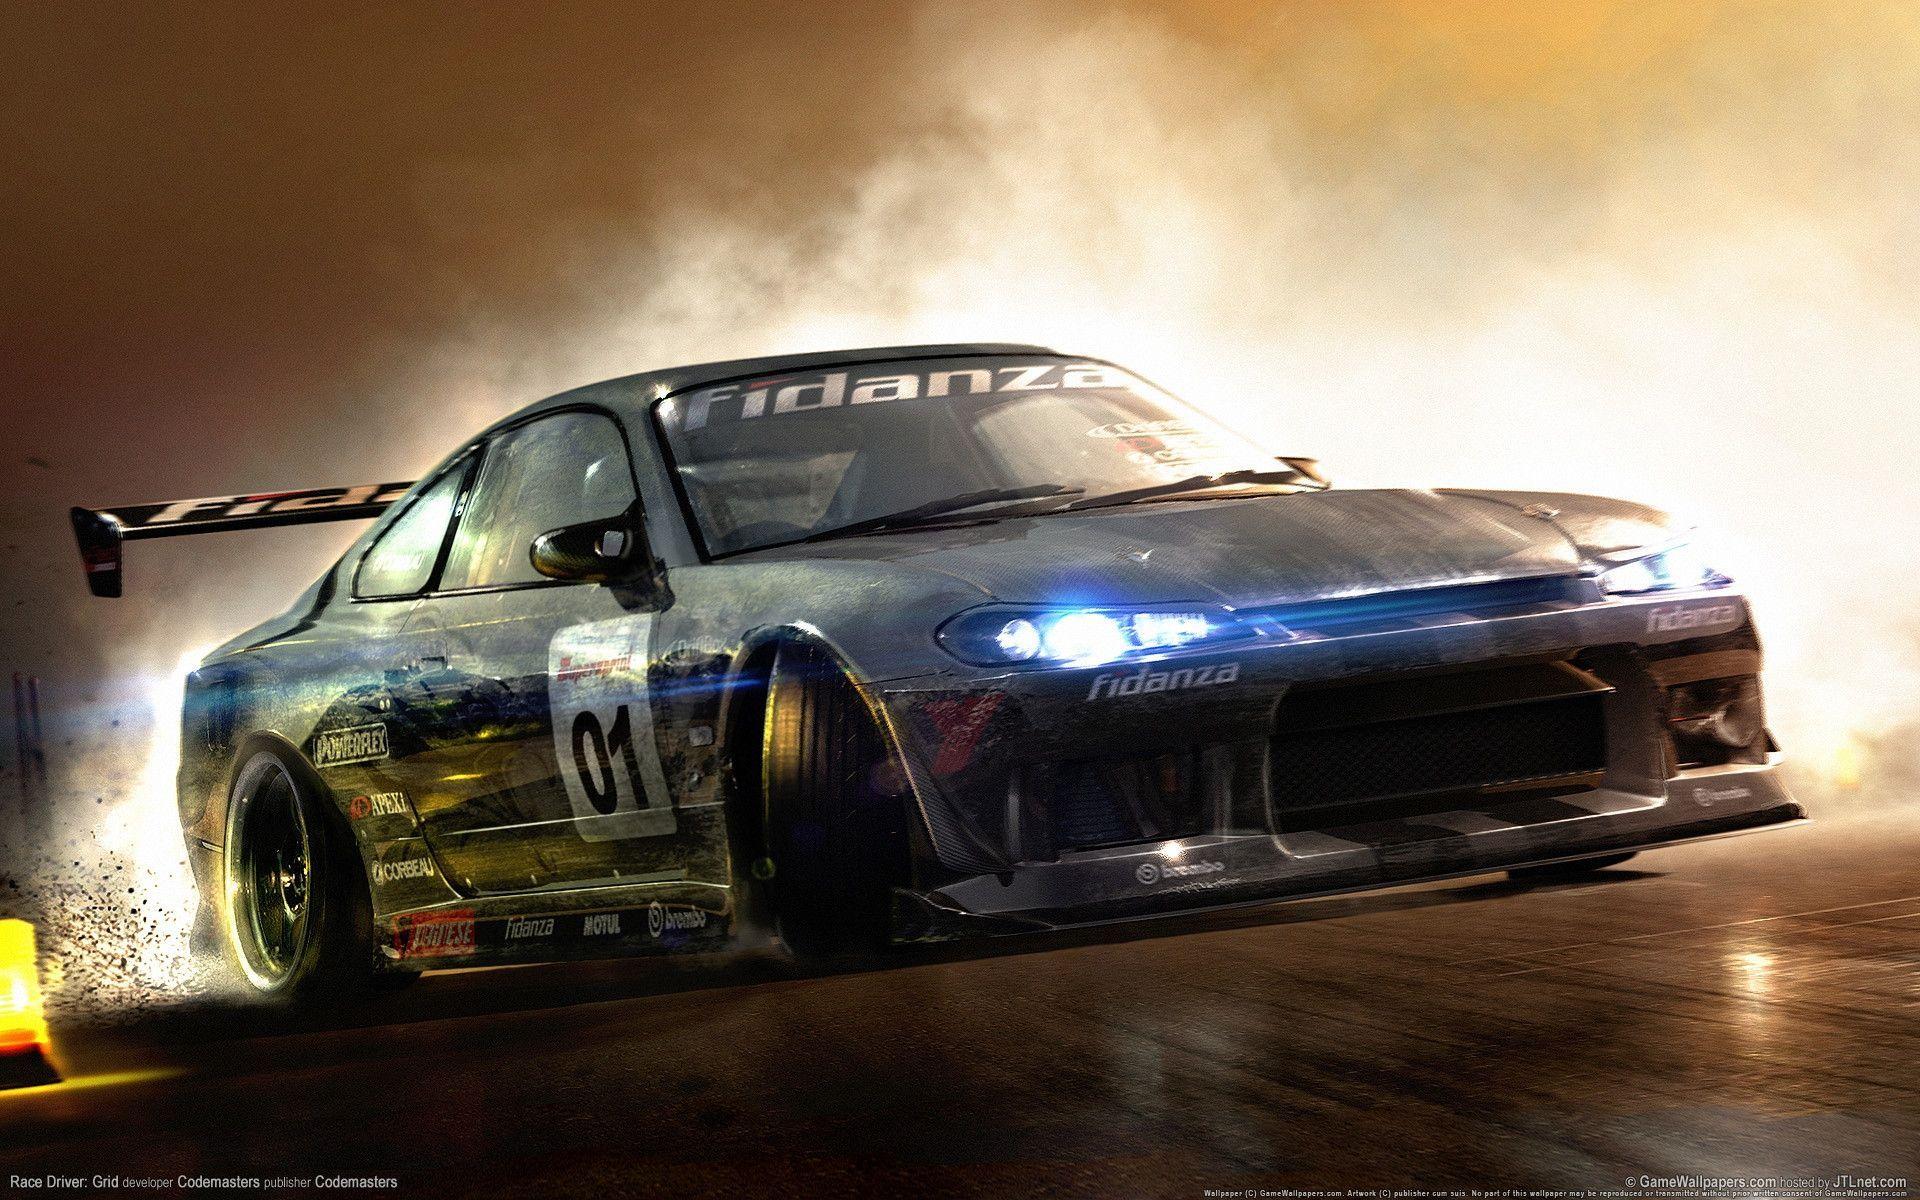 Surreal Drift Car Live Wallpaper for Your Home Screen - free download